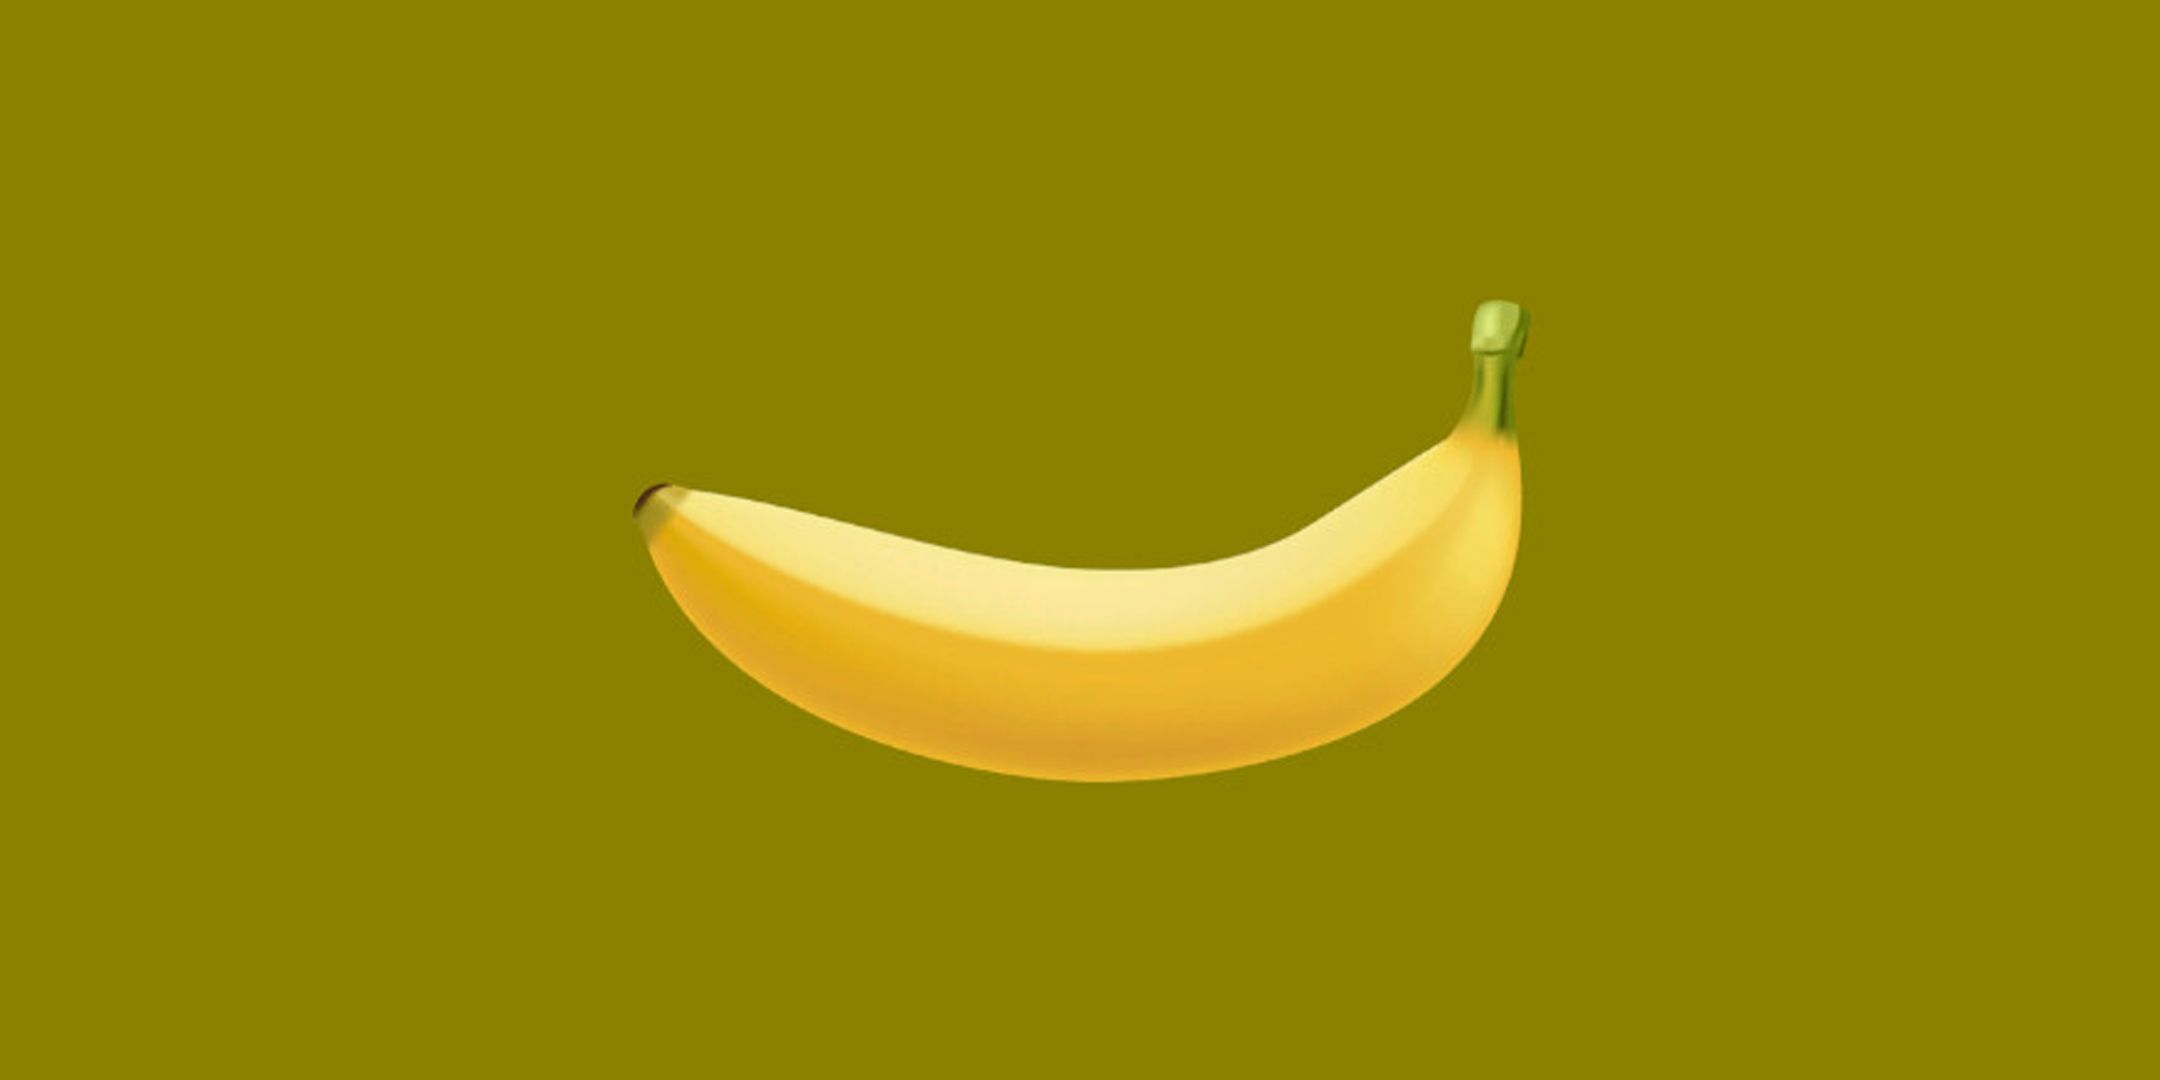 Banana over a yellow background